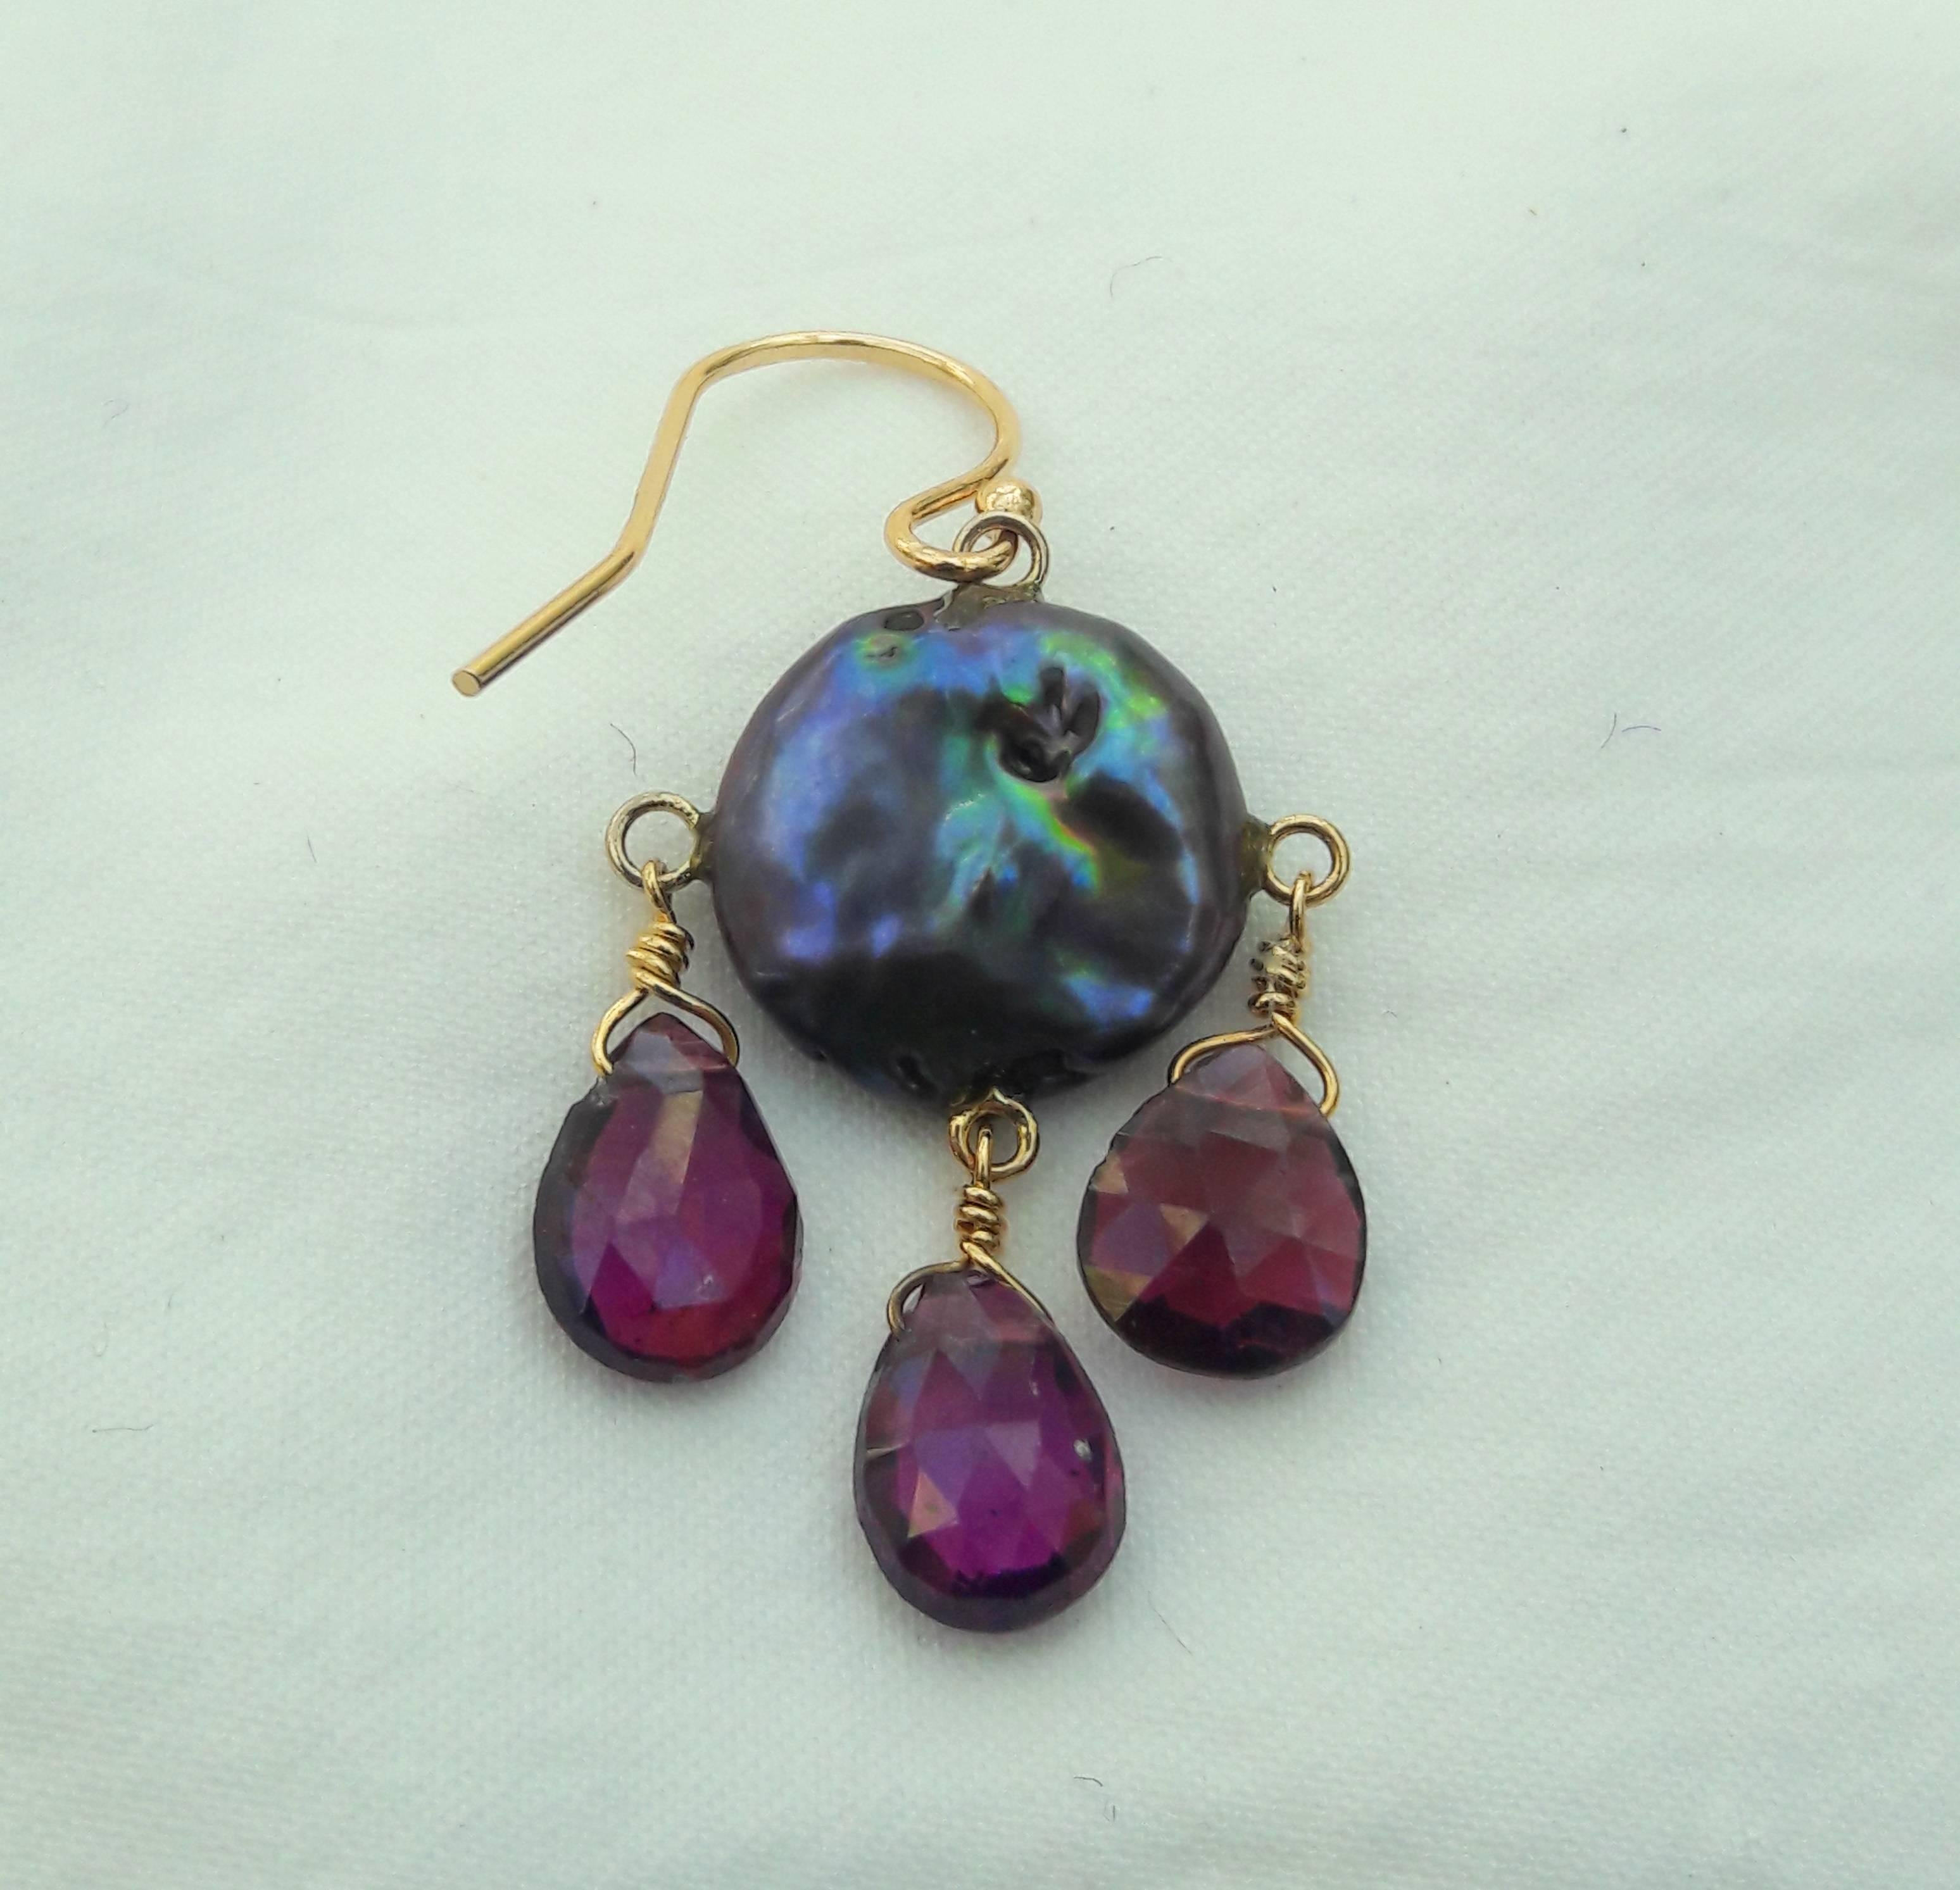 Artist Marina J Black Pearl and Pink Tourmaline Earrings with 14k Yellow Gold Hook